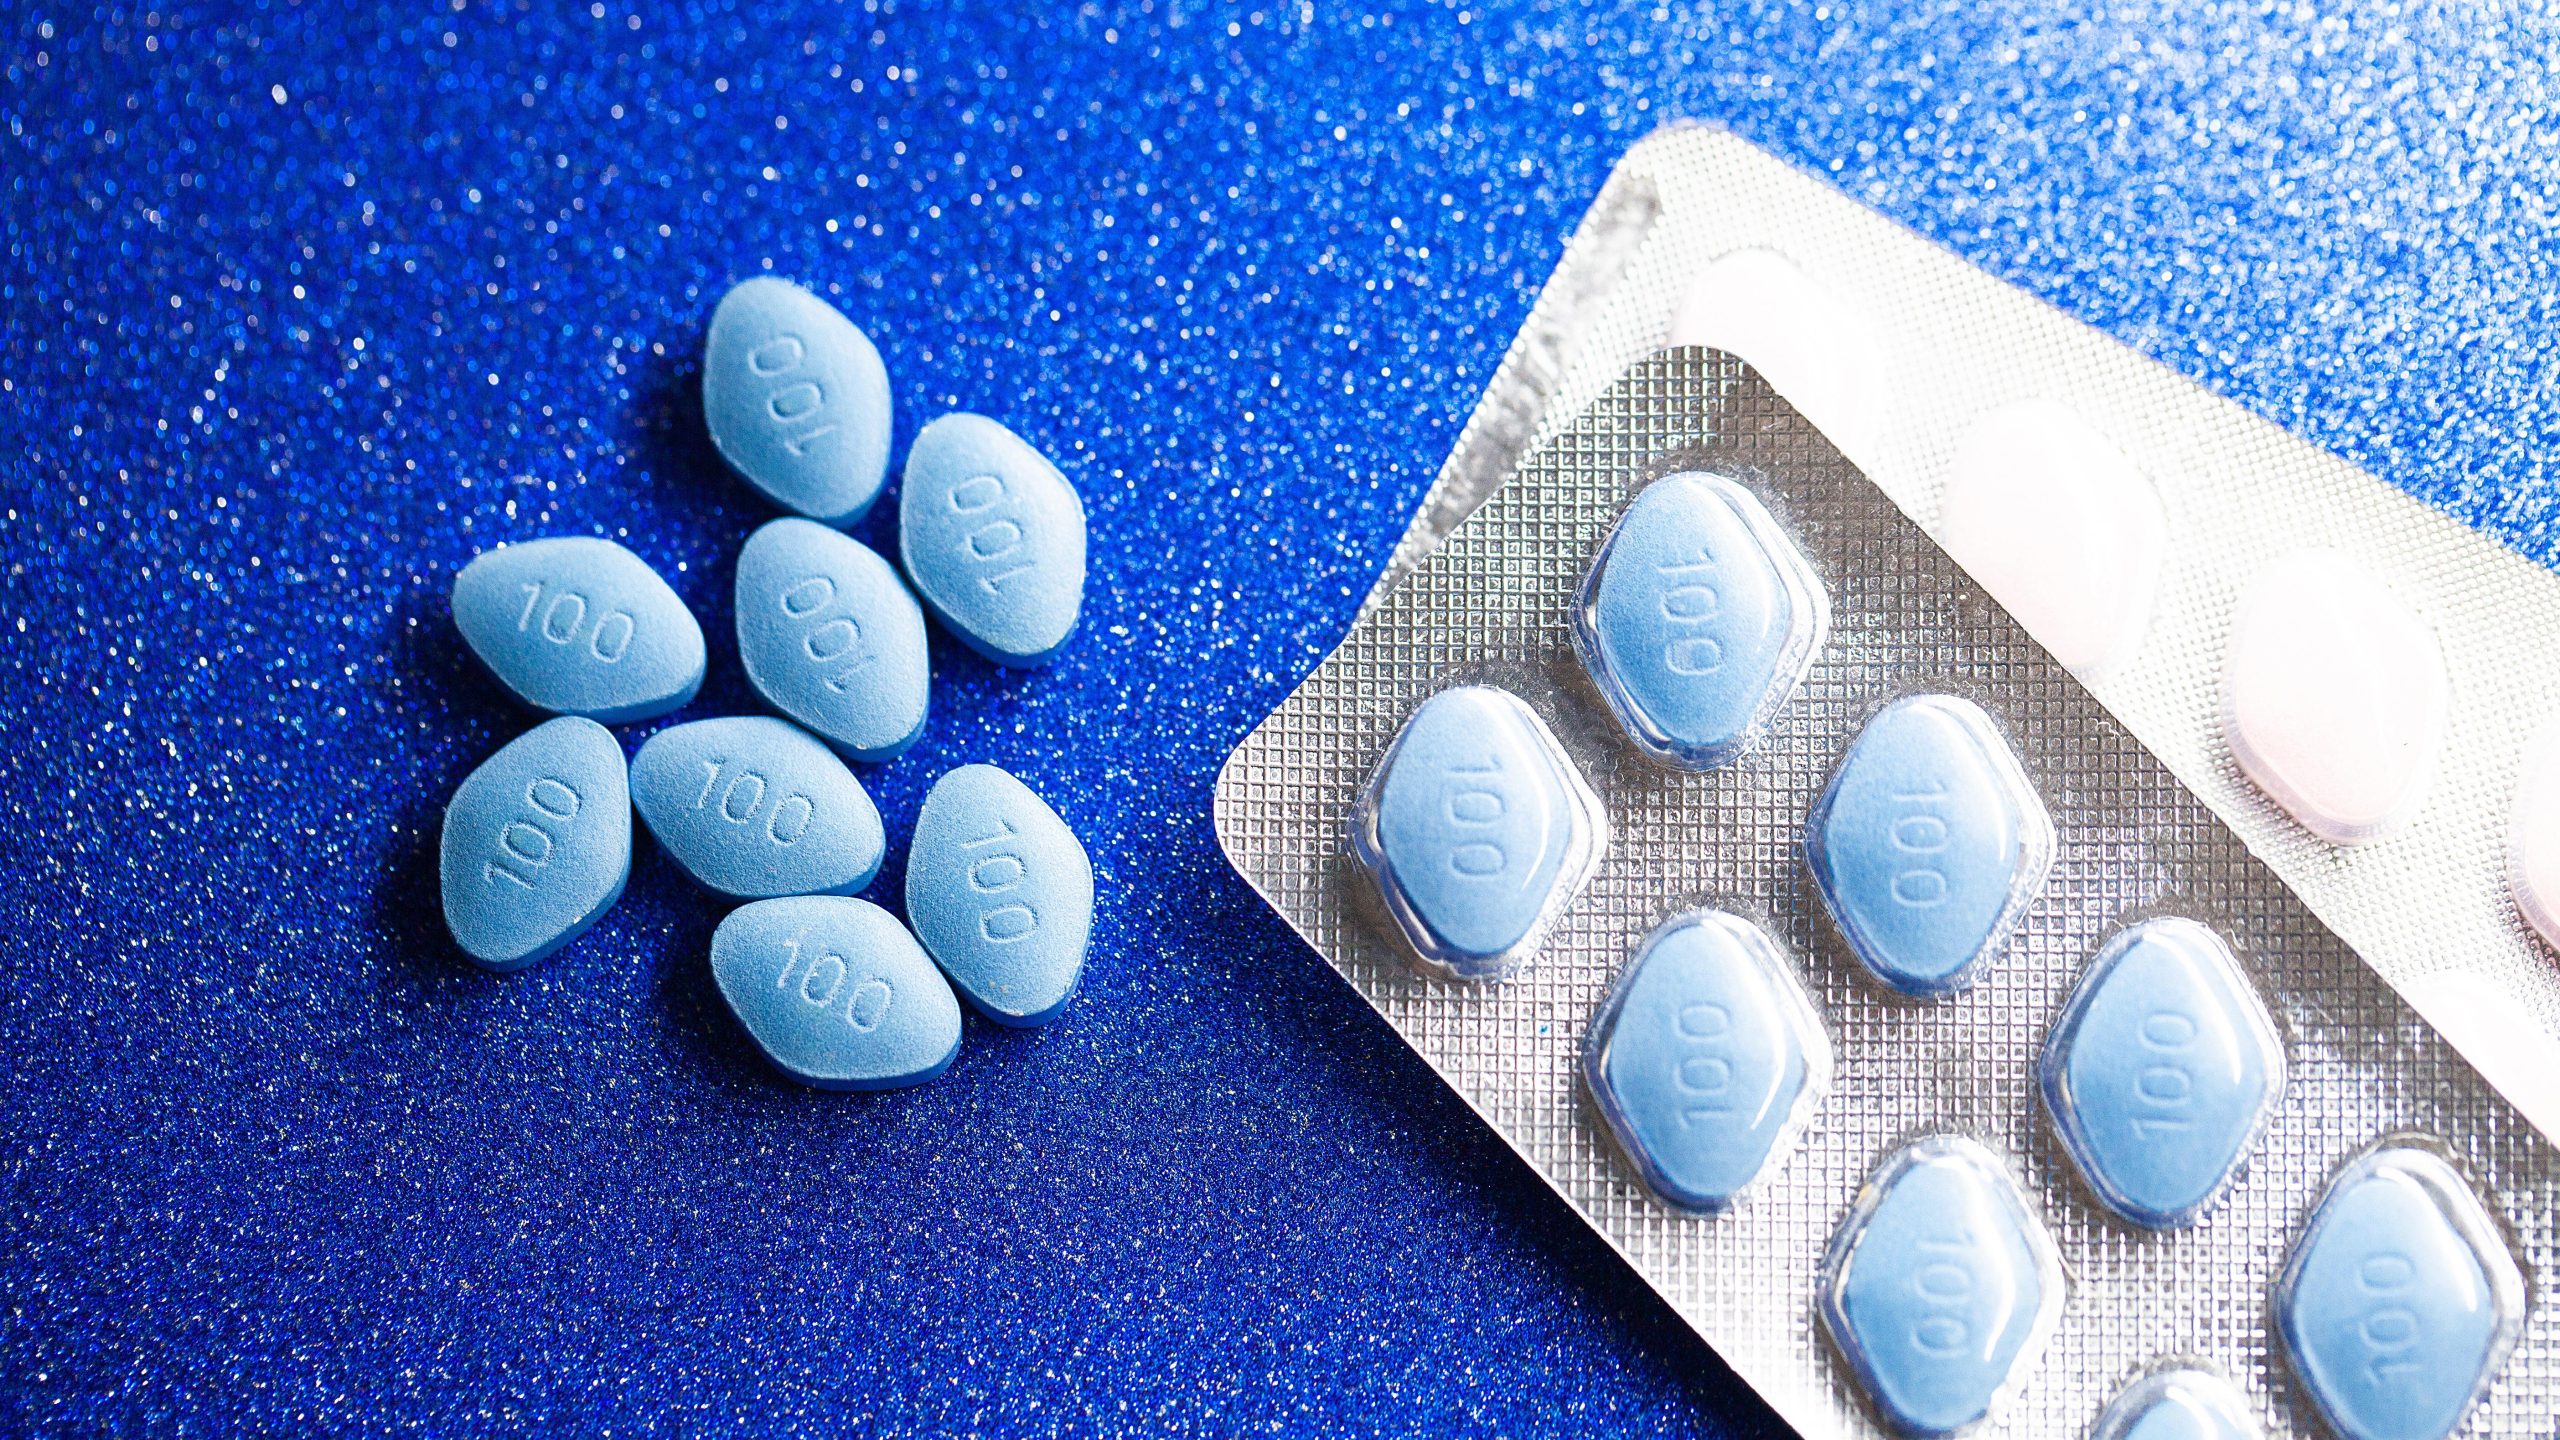 Viagra Could Be a Potent Weapon Against Alzheimer’s Disease [Video]